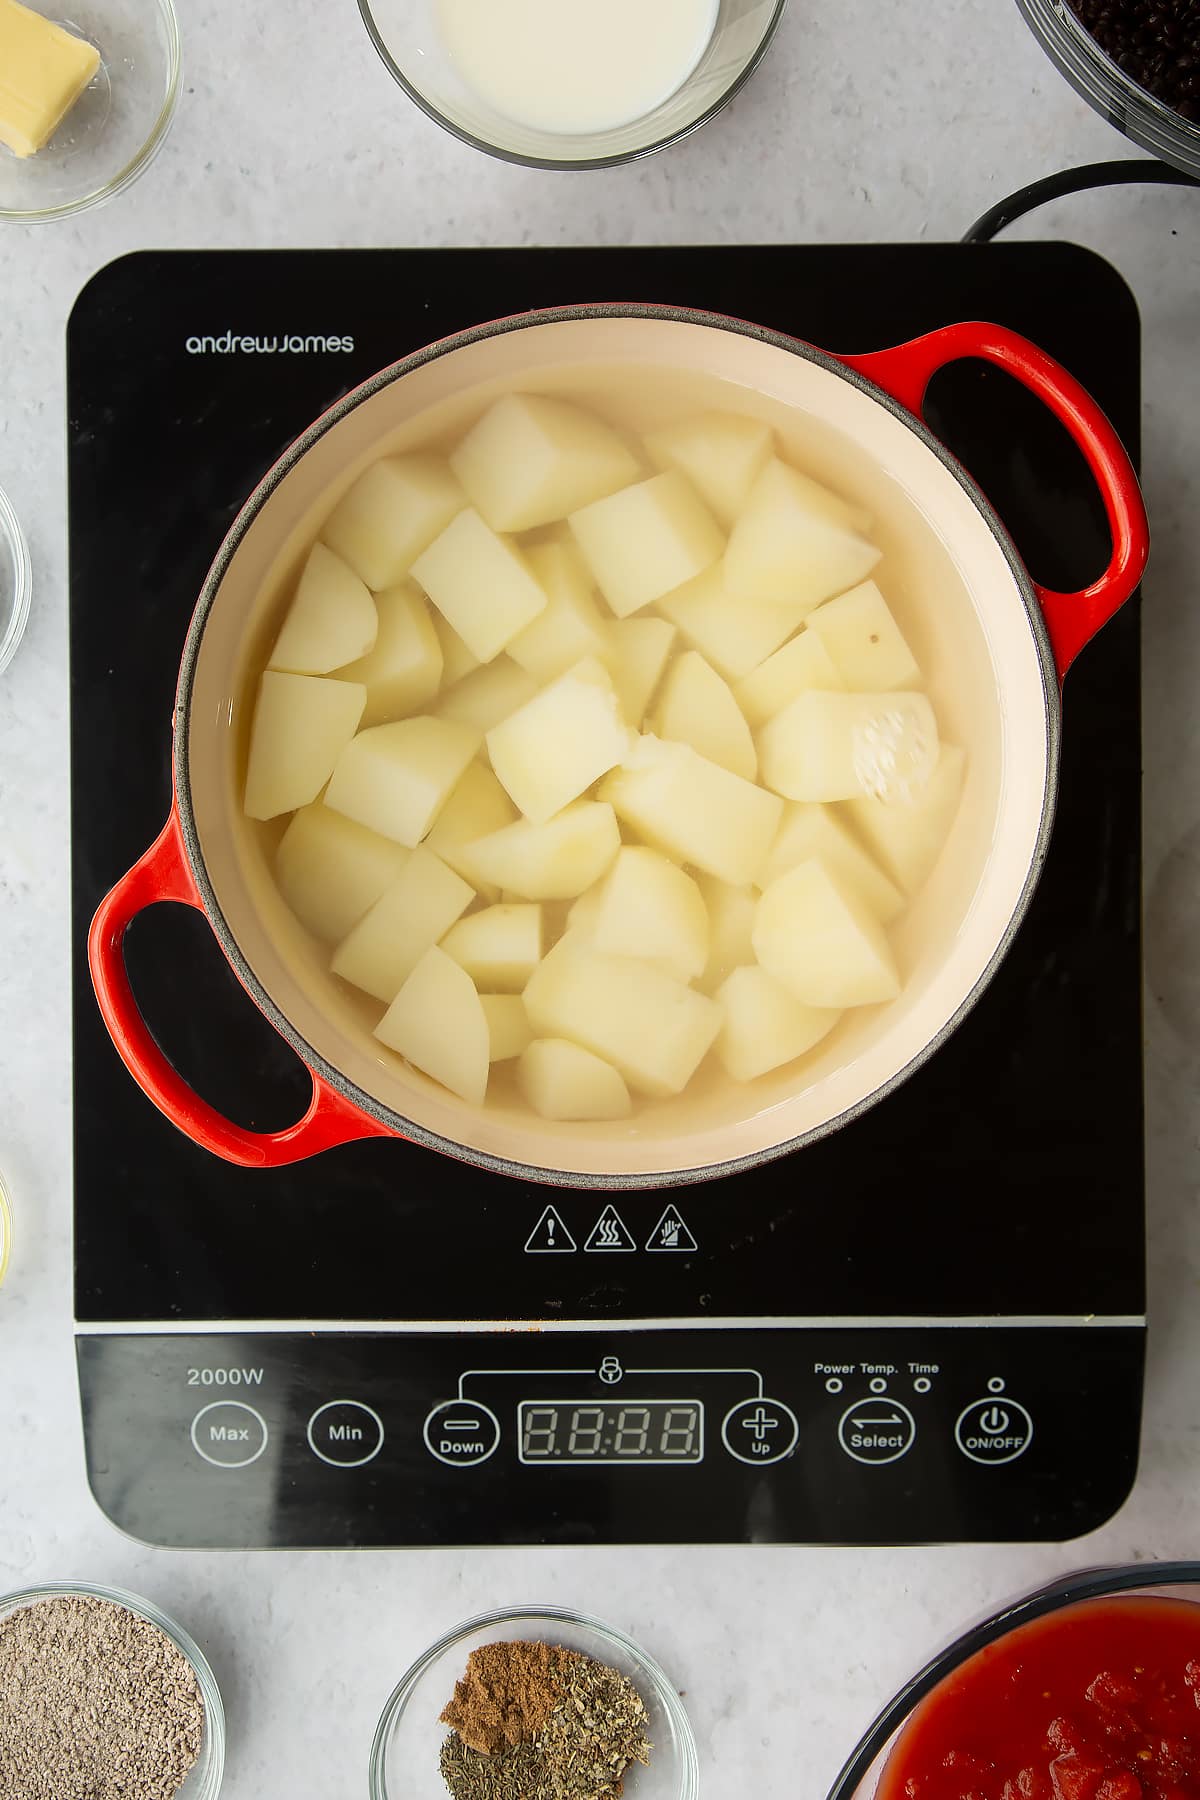 a pan on an induction hob with chopped potatoes in water.